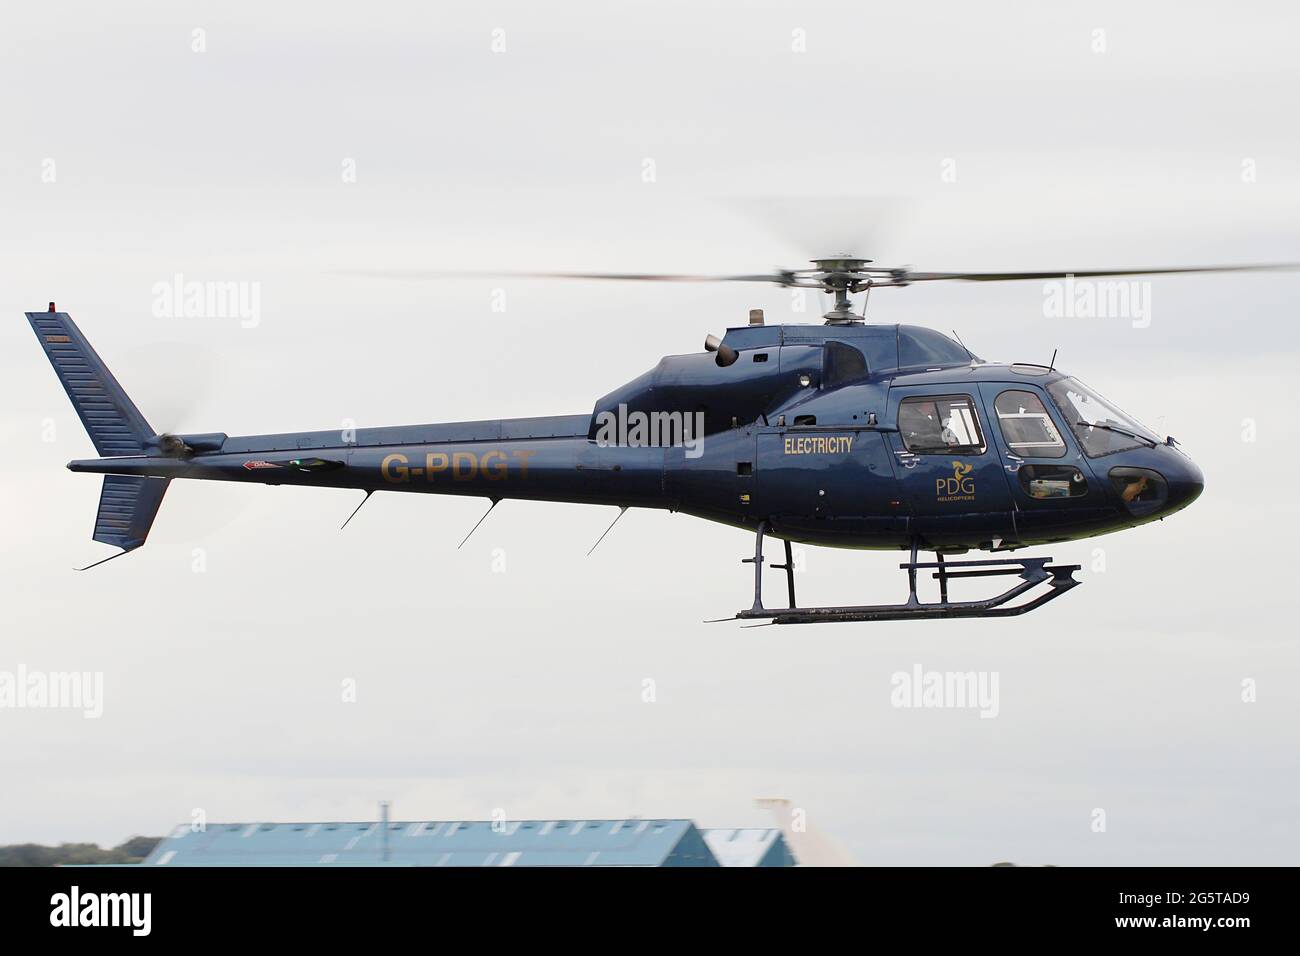 G-PDGT, a Eurocopter AS.355F2 Ecureuil 2 operated by PDG Helicopters, at Prestwick International Airport, in Ayrshire, Scotland. Stock Photo